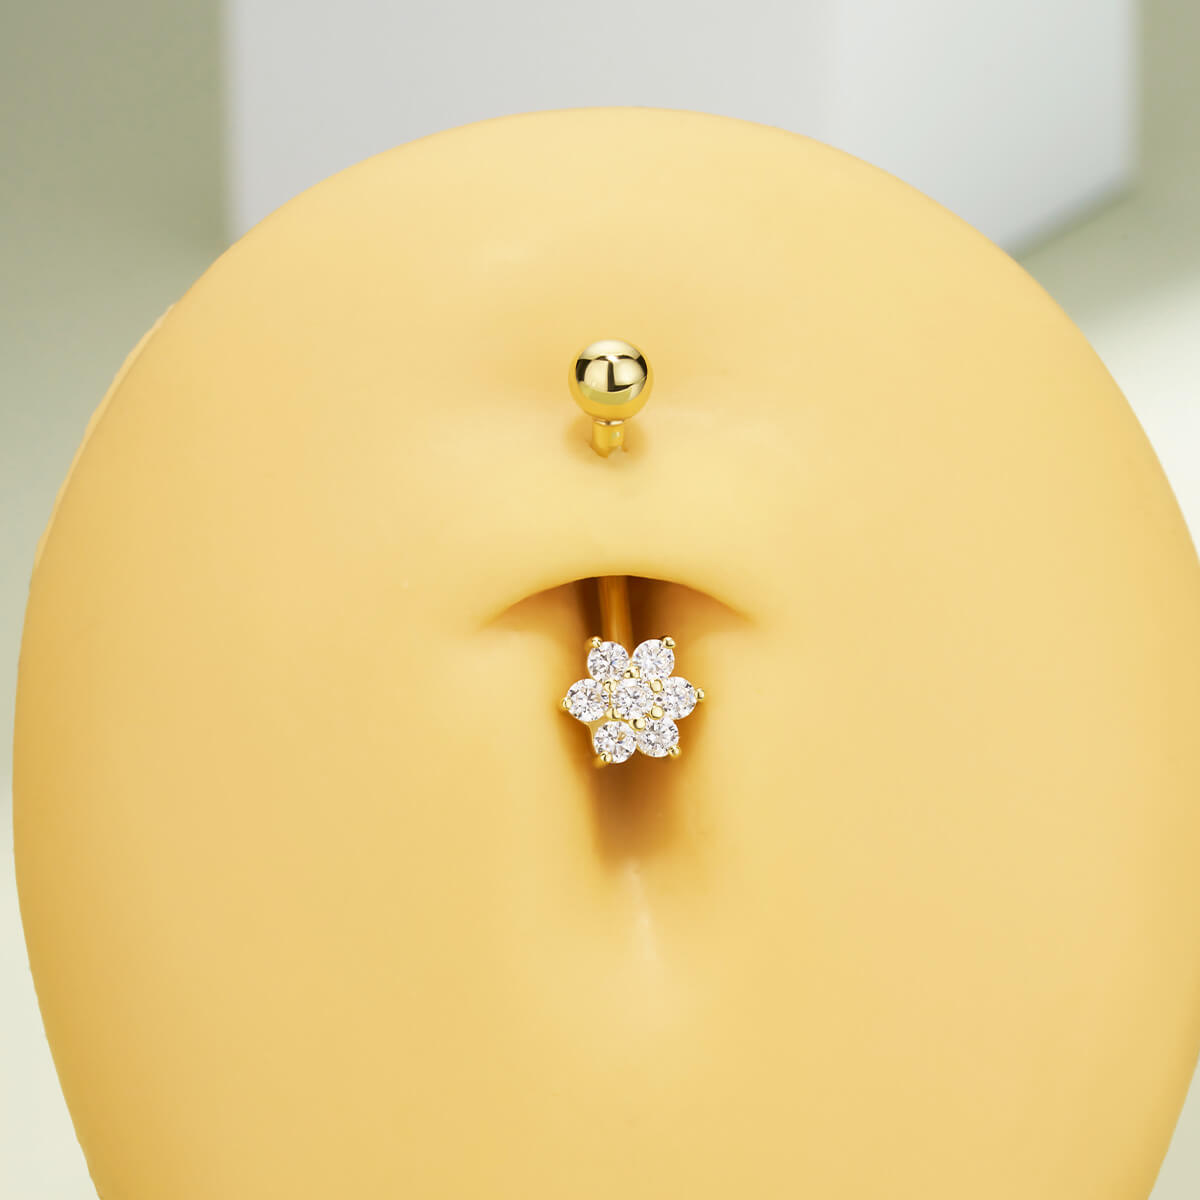 snowflake belly button piercing